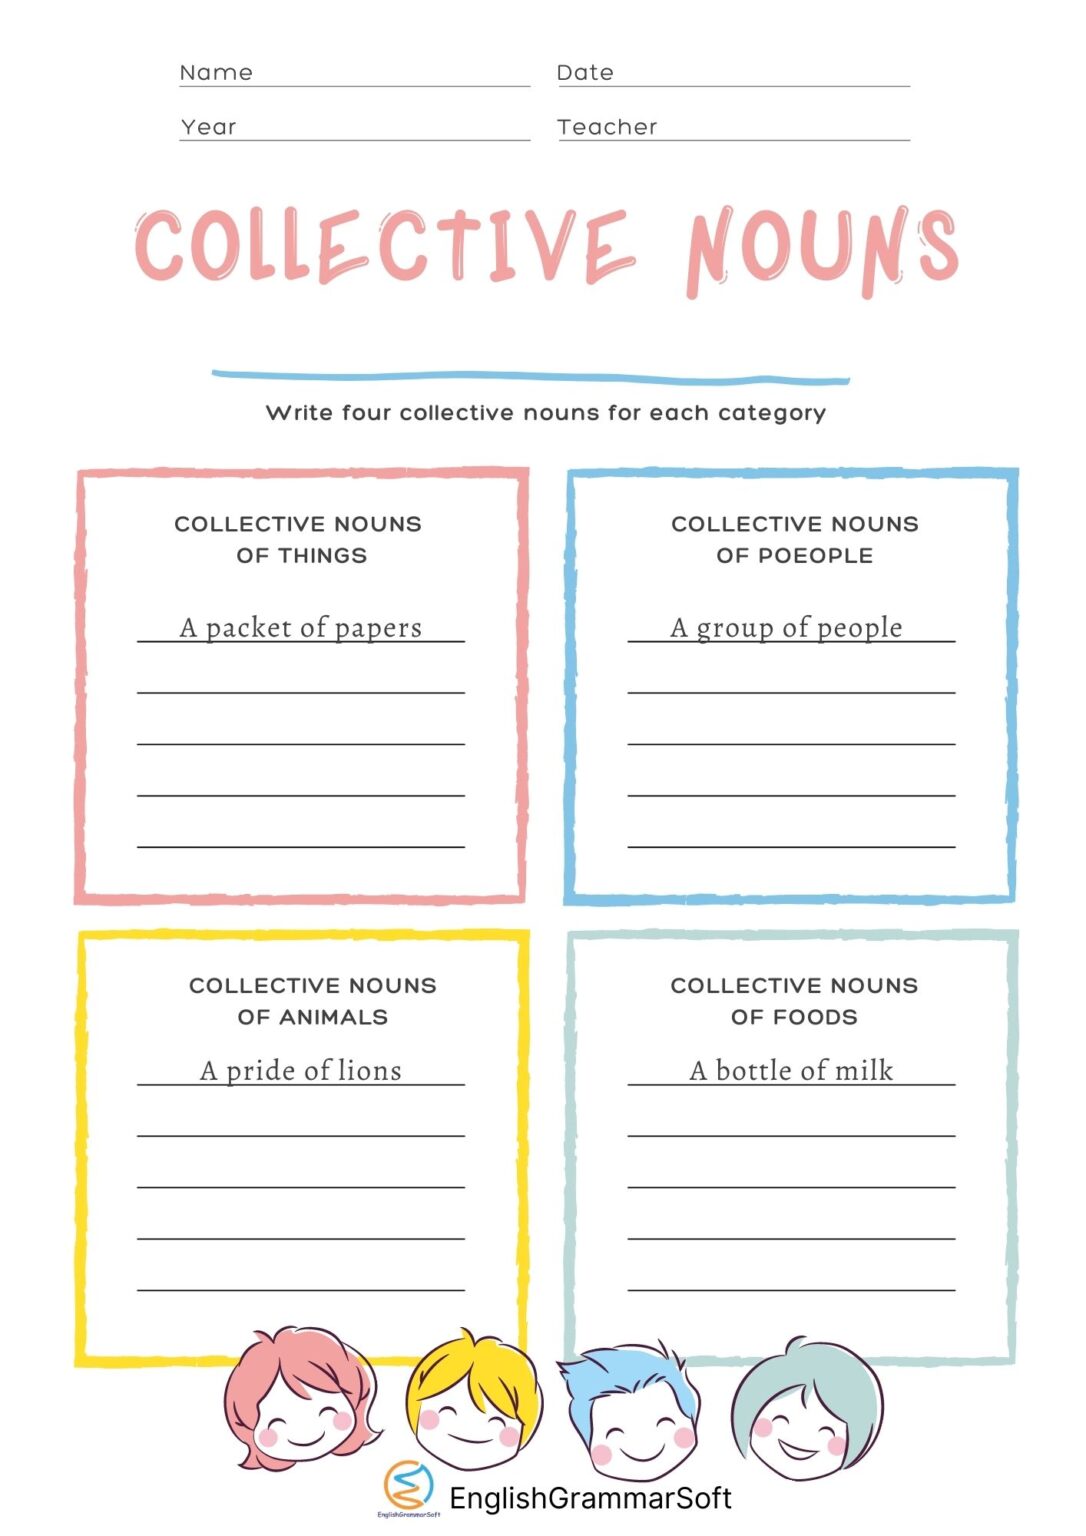 Free Worksheet For Collective Nouns